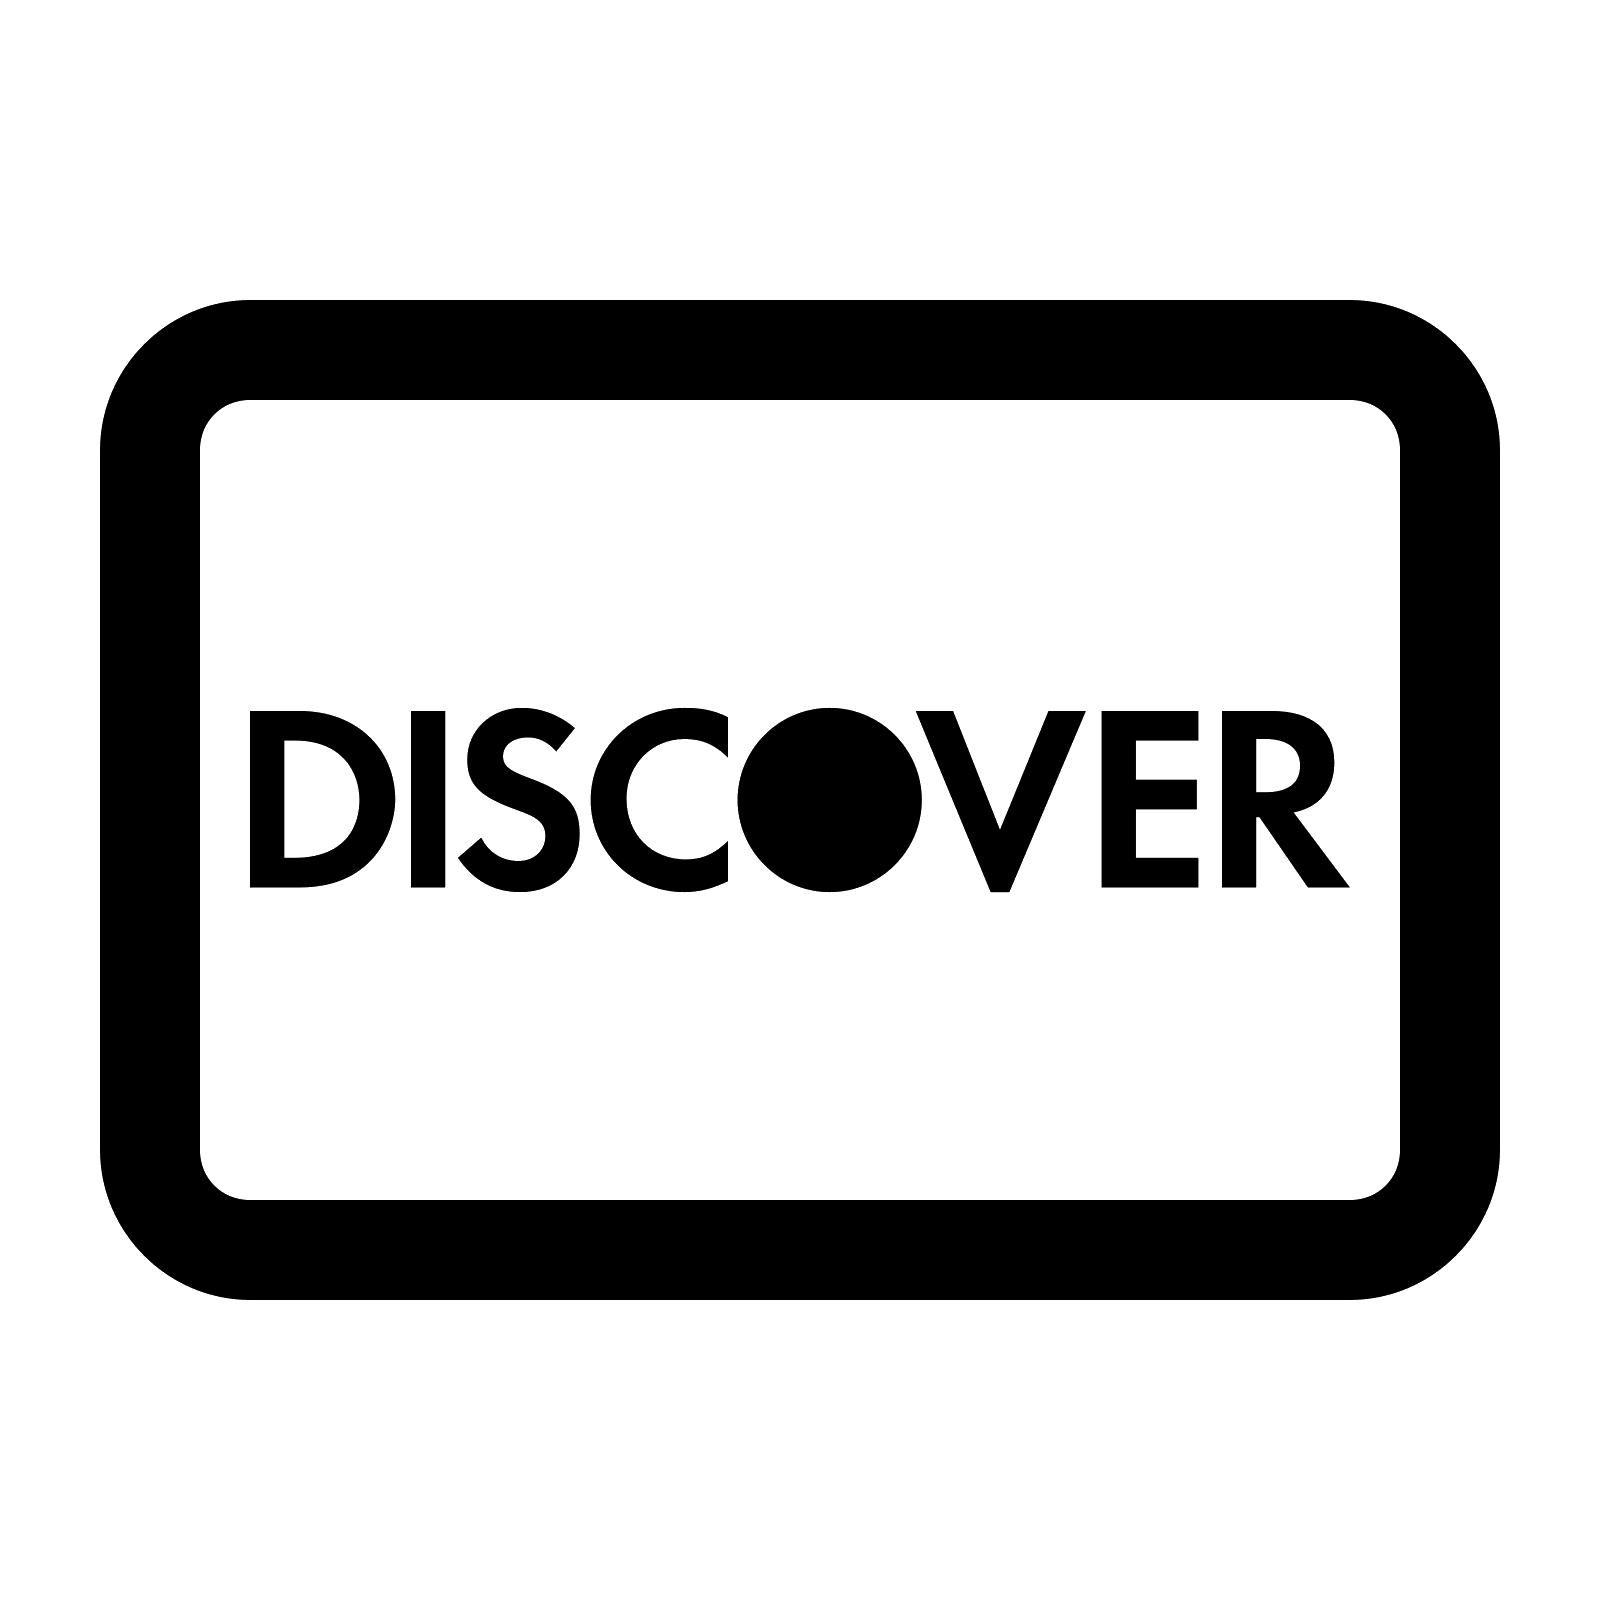 Discover Card Logo - Free Discover Card Icon 68905. Download Discover Card Icon